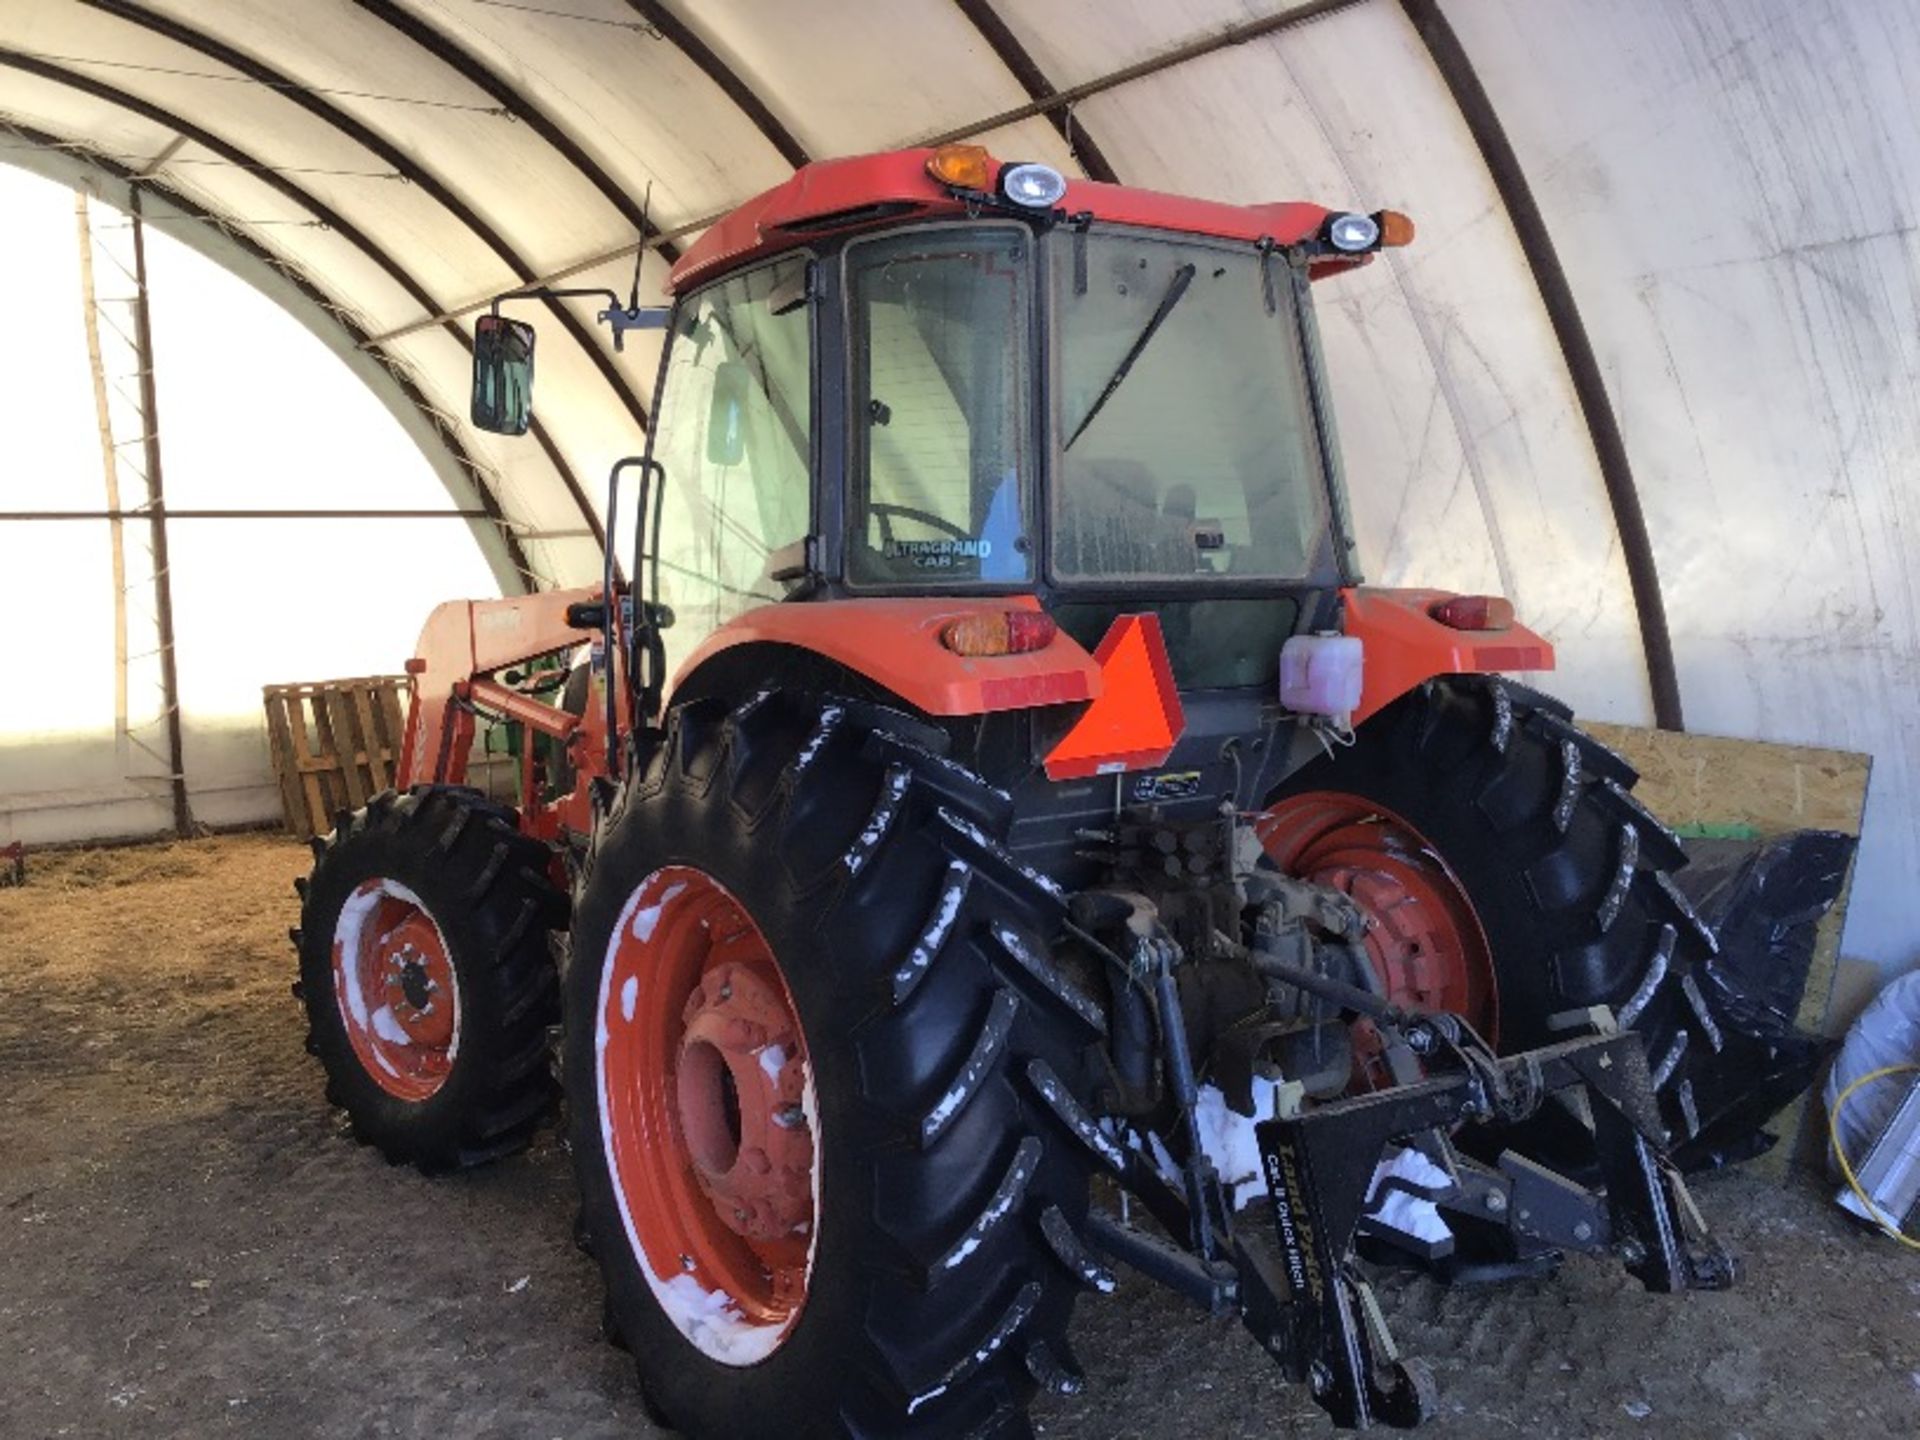 2011 M9540 Kubota Tractor W/ LA353 Front End Loader & Bucket, 2 Forks(may sell sepesrate), 1104 - Image 4 of 12